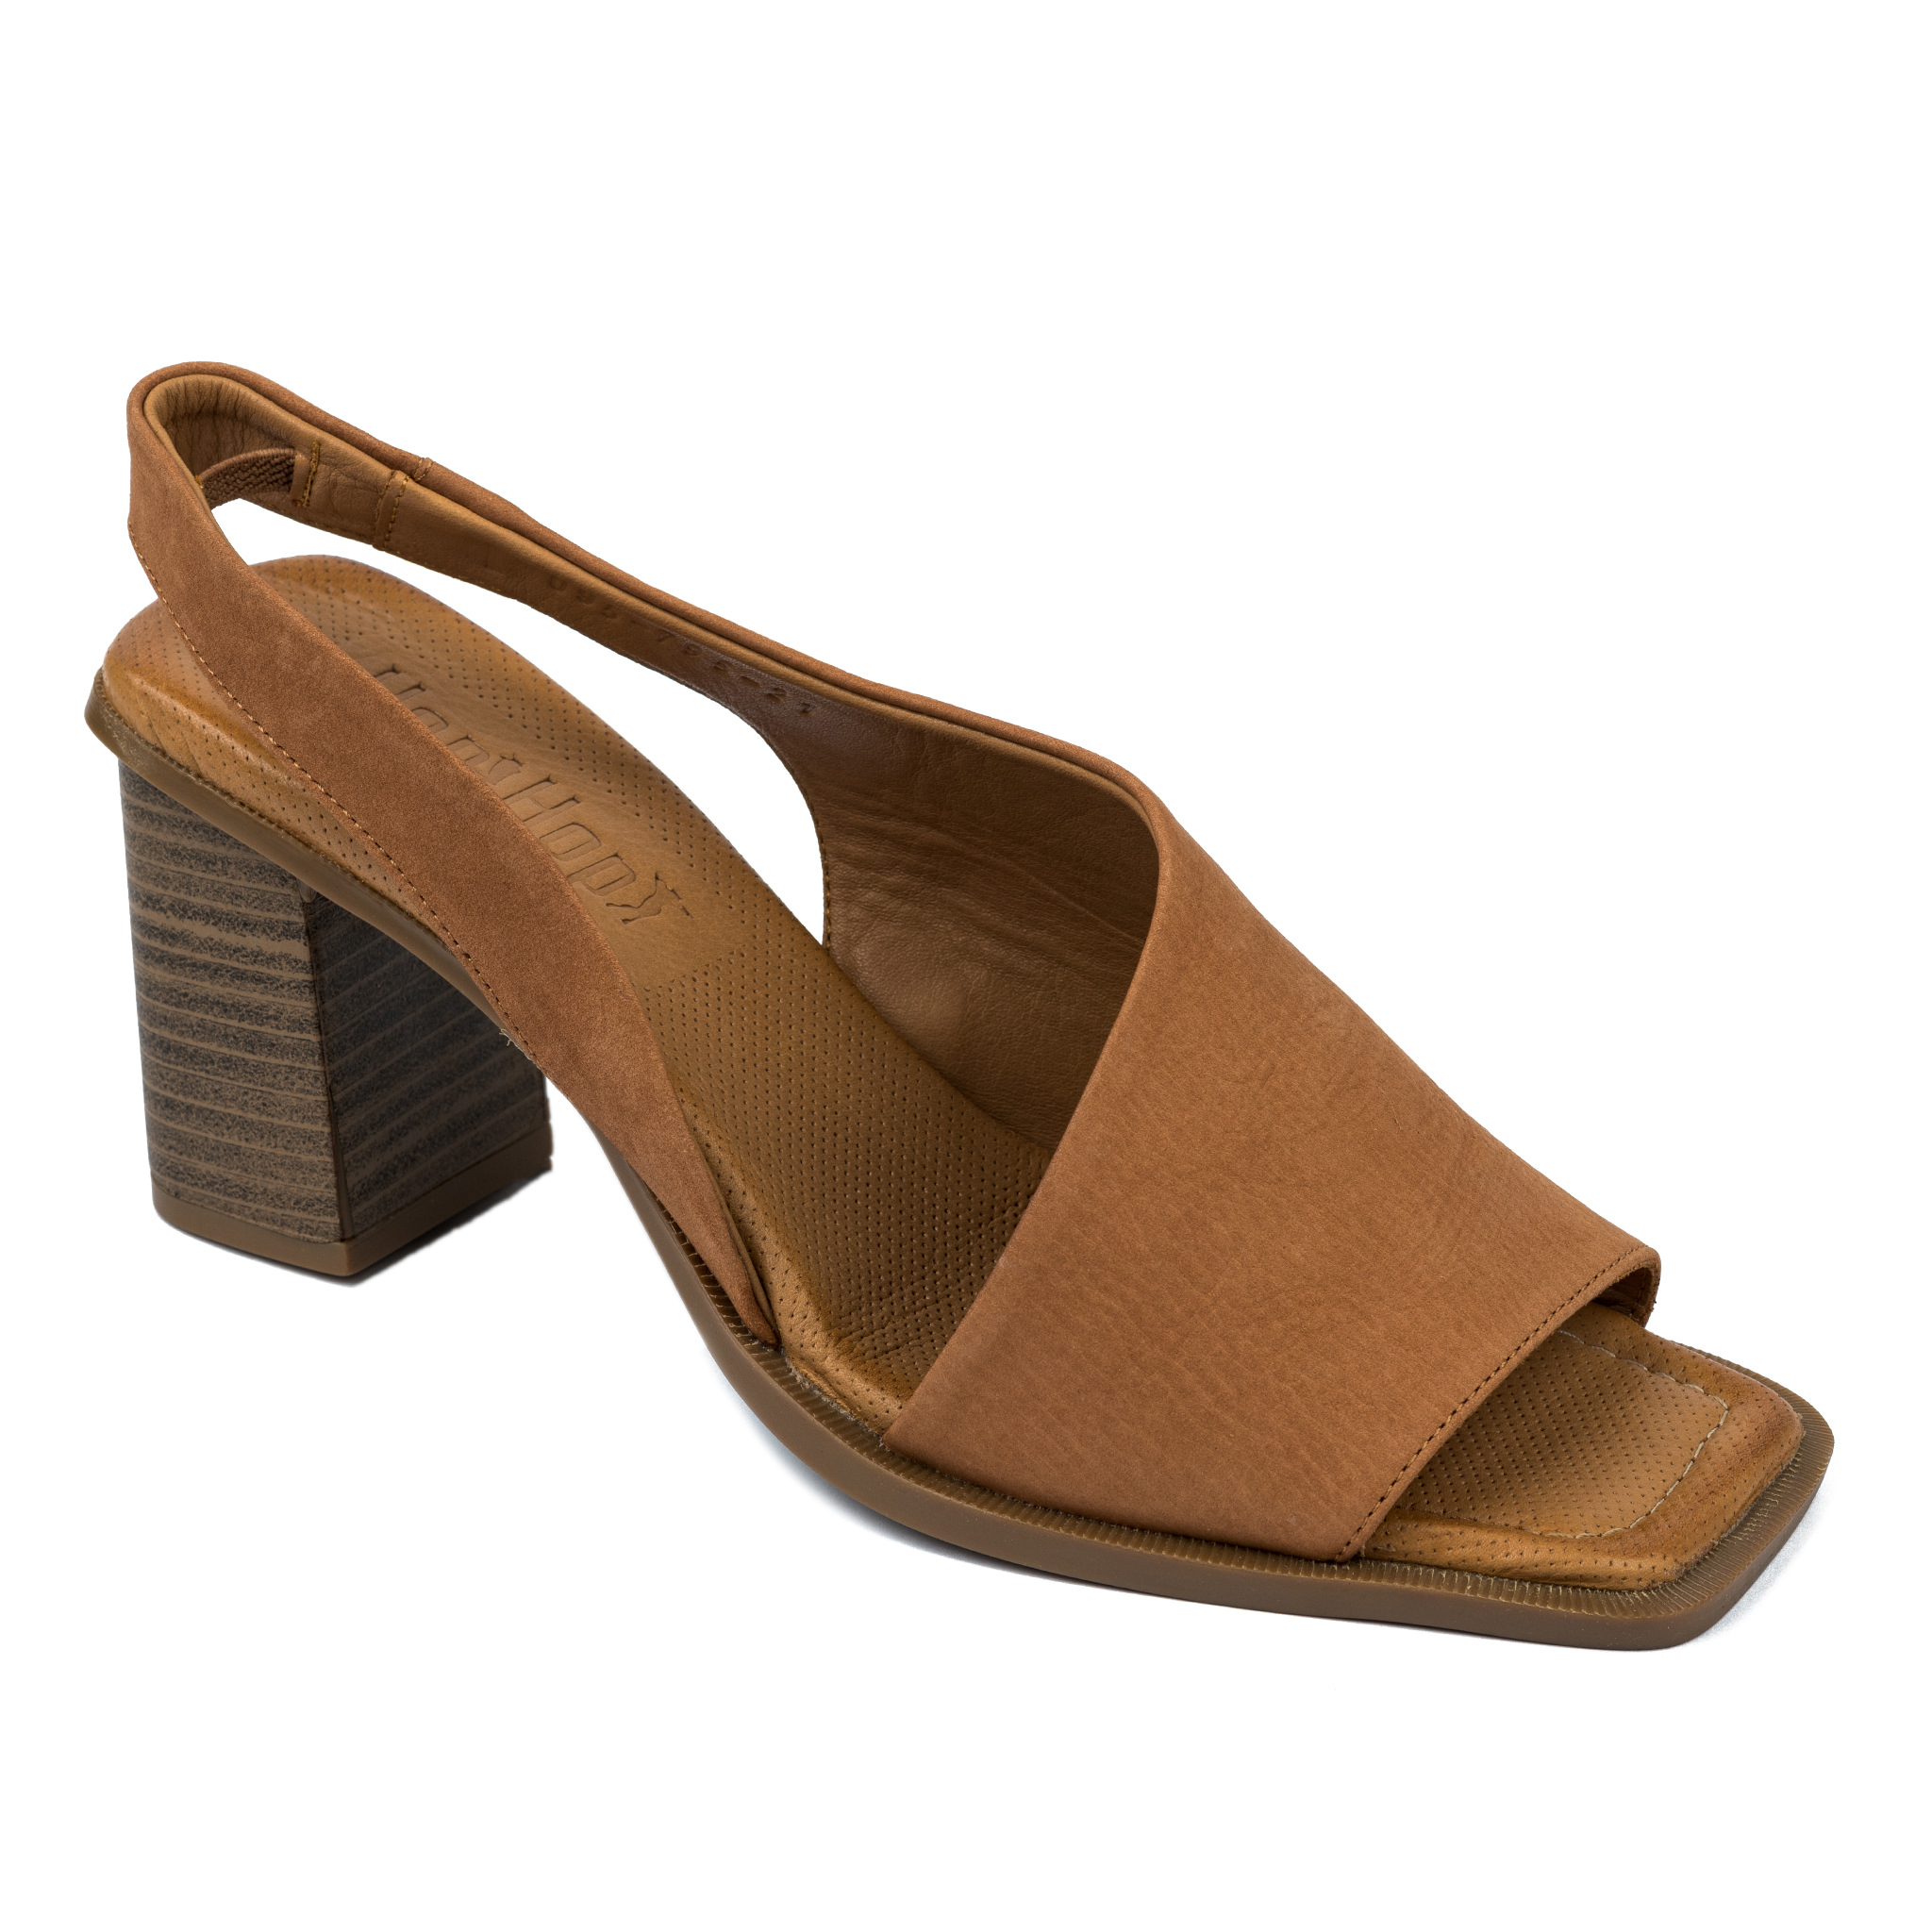 Leather sandals A675 - CAMEL